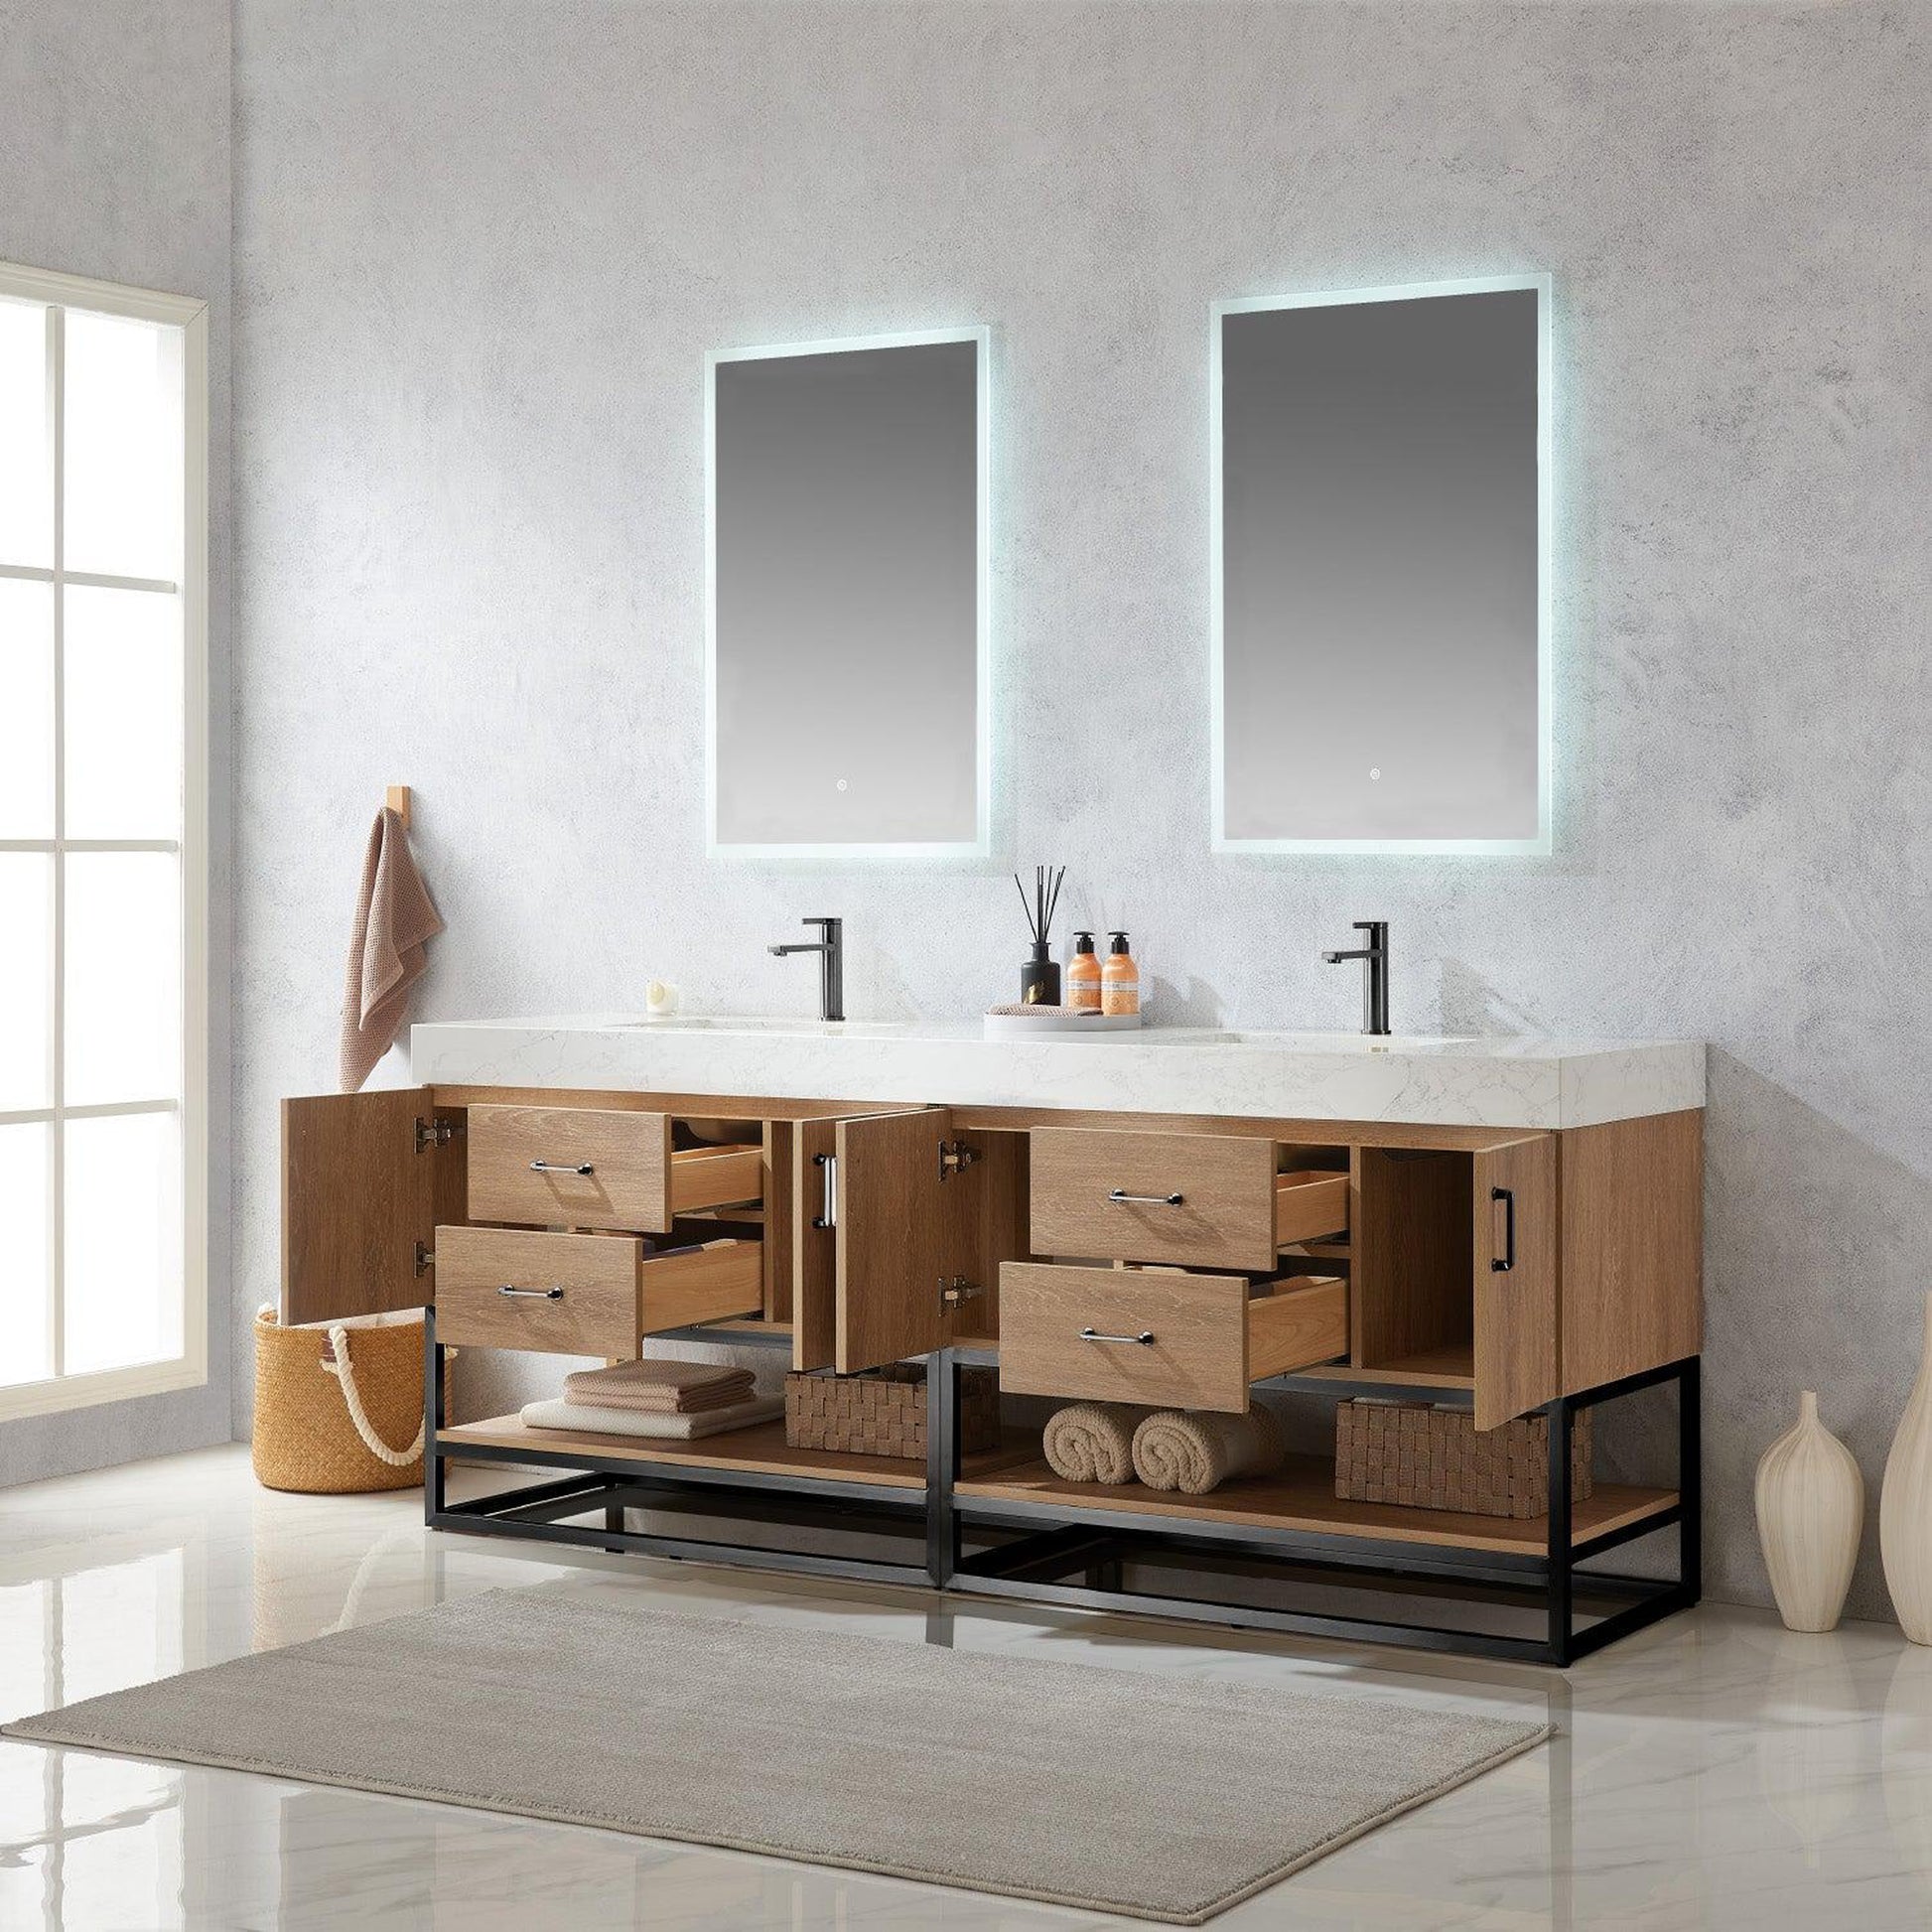 Vinnova Alistair 84" Double Sink Bath Vanity In North American Oak And Matte Black Finish With White Grain Stone Countertop And Mirror